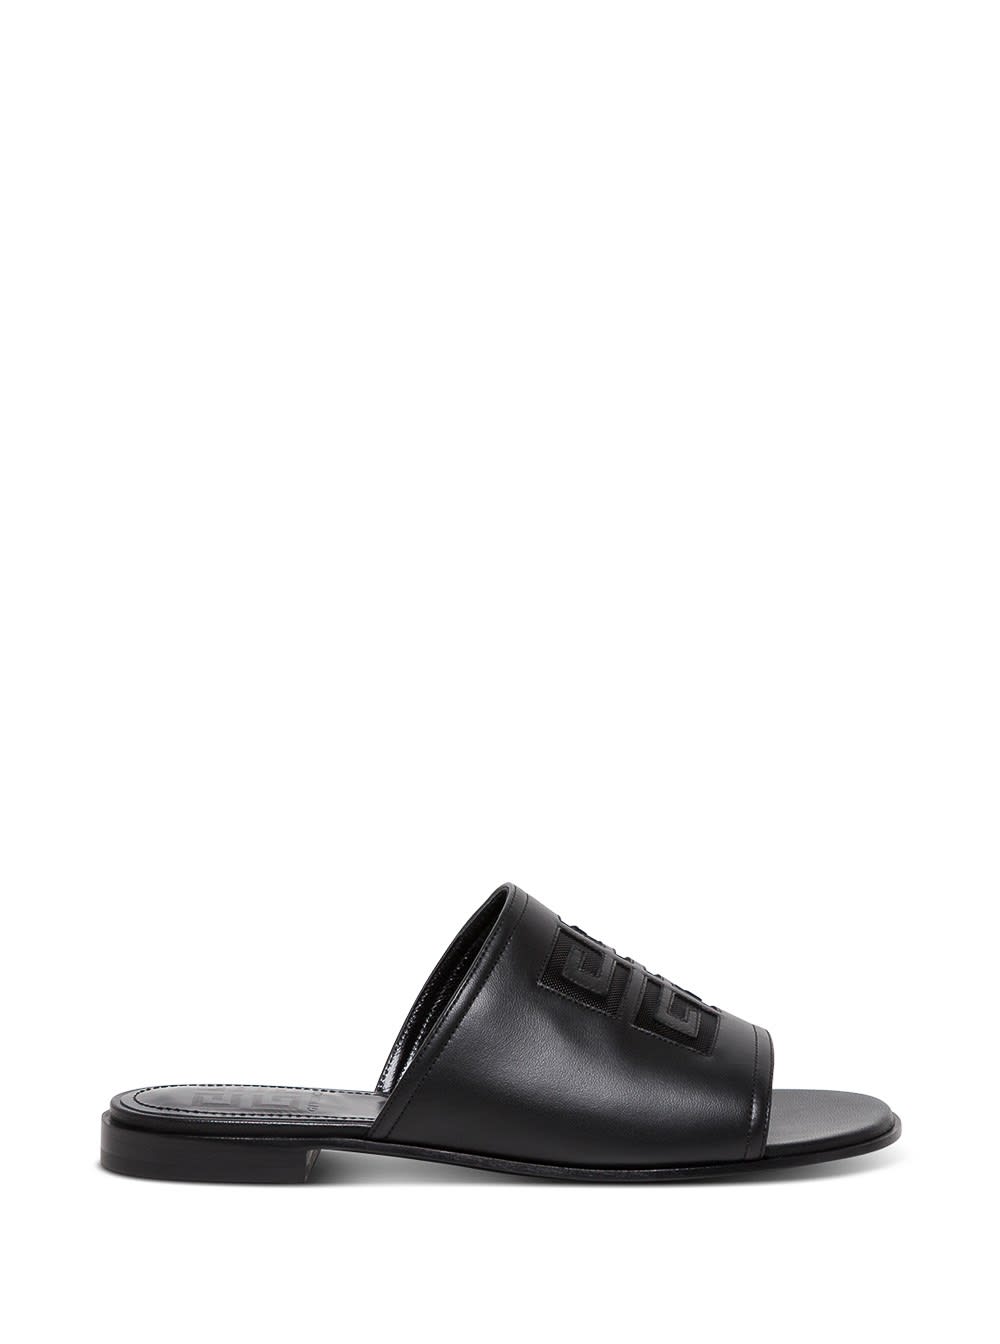 Givenchy 4g Slide Sandals In Black Leather With Logo